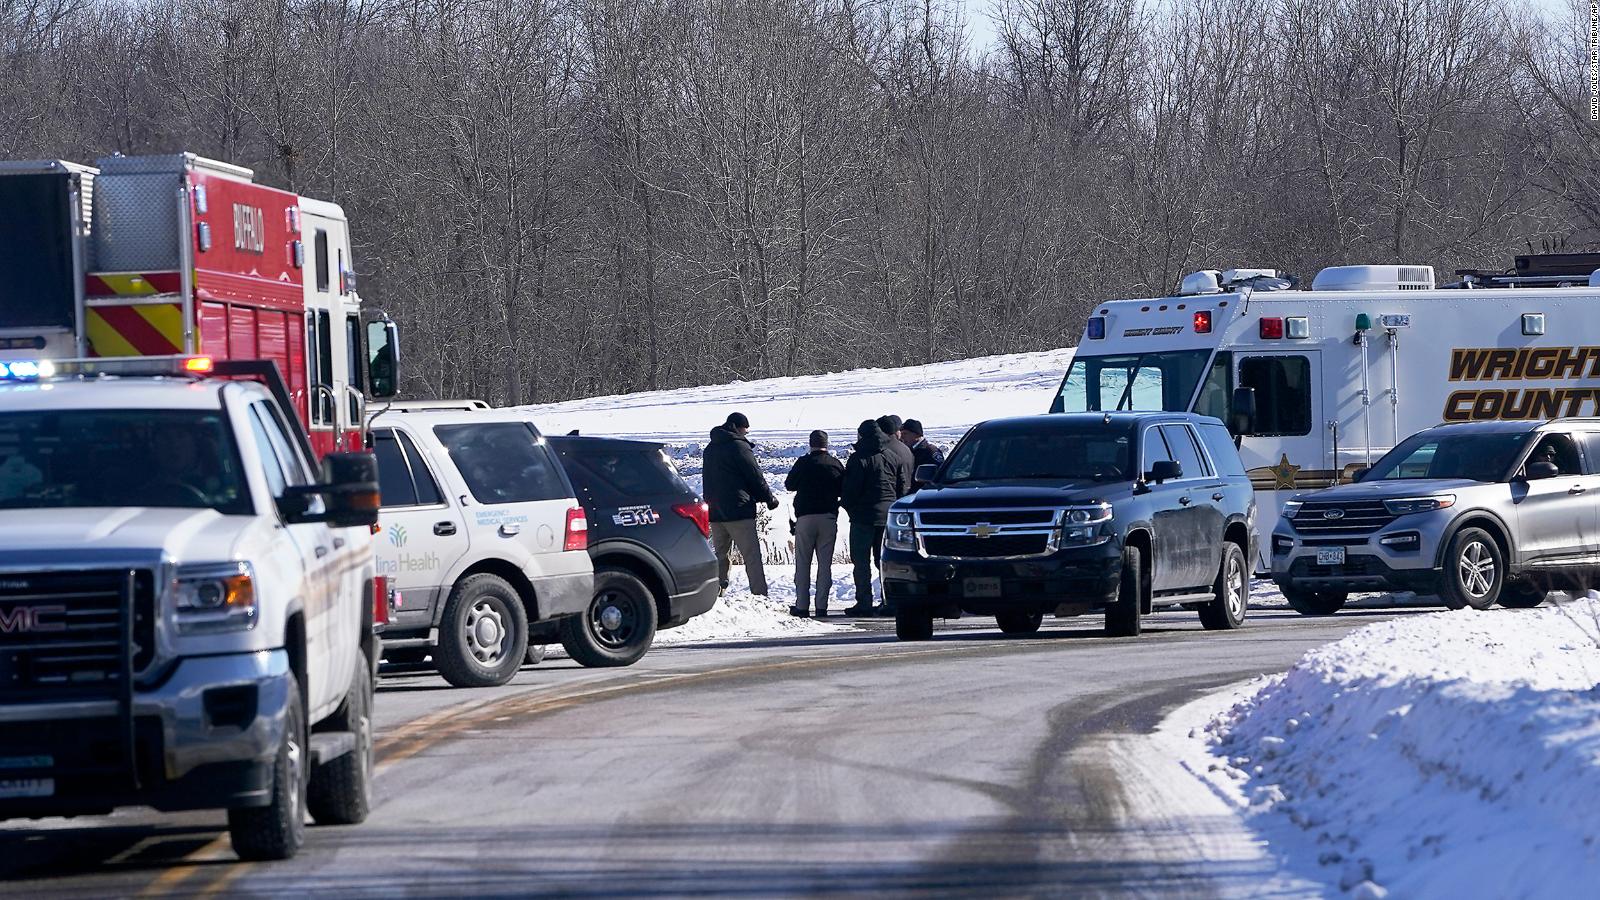 Suspect In Minnesota Clinic Shooting Had Made Prior Threat Police